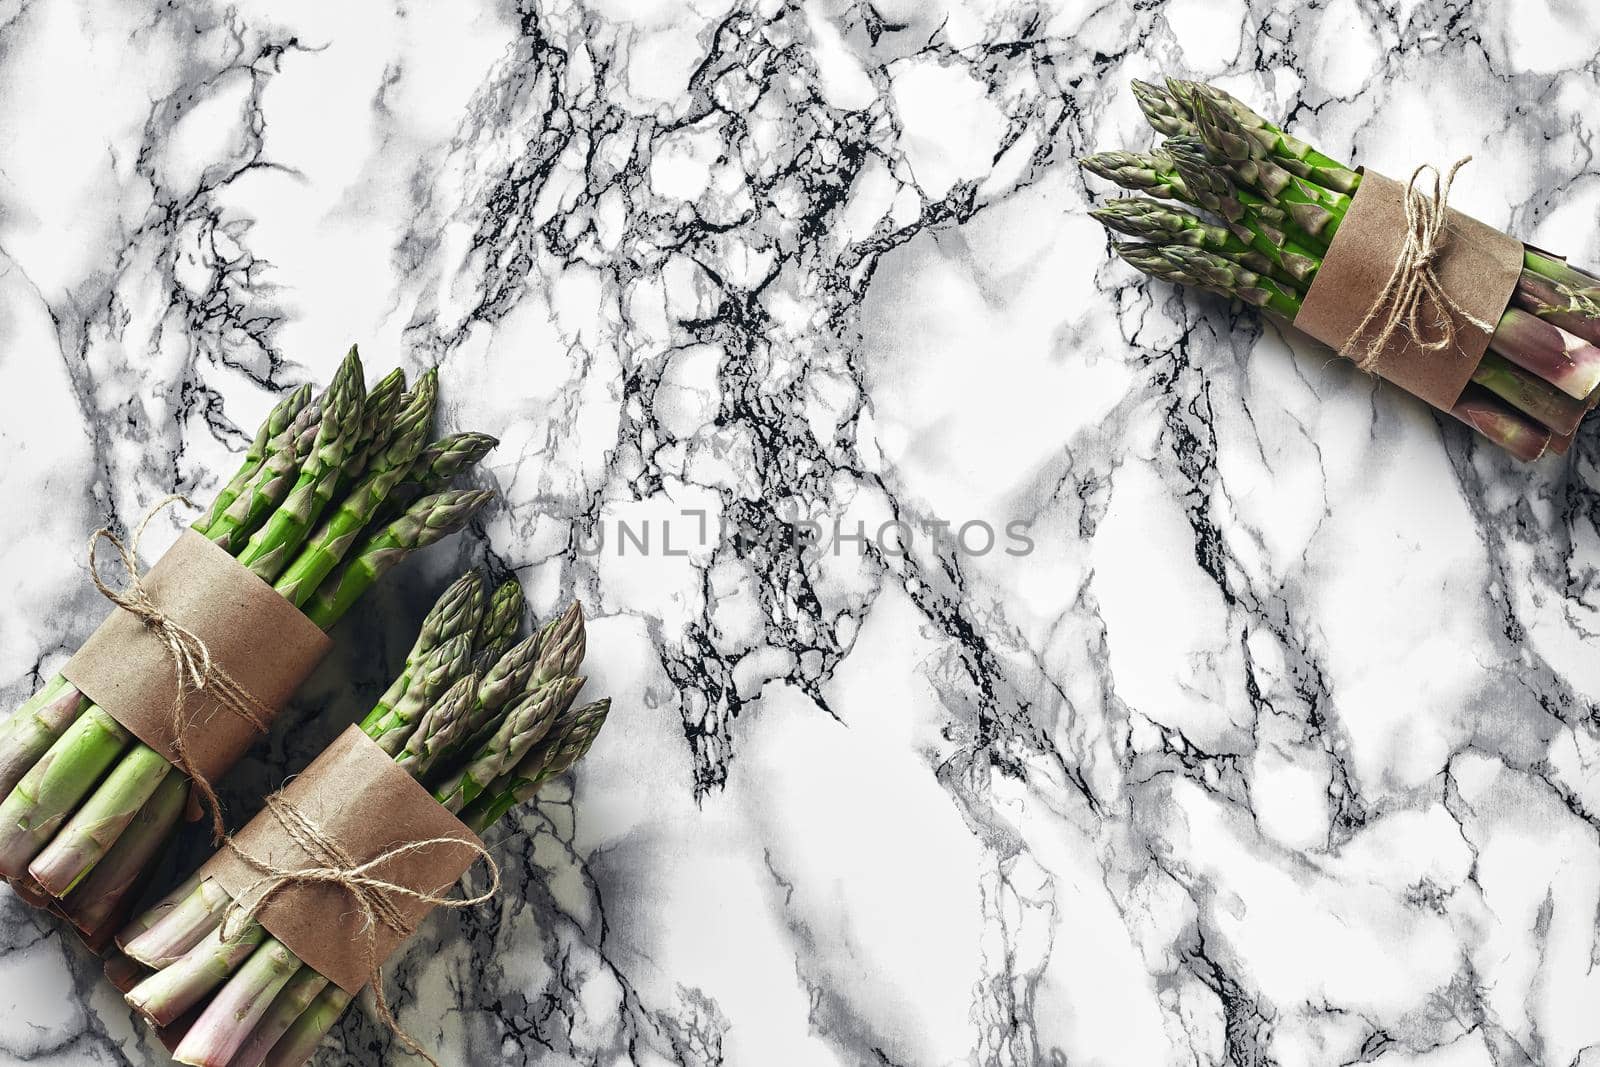 Bunch of an edible, juicy spears of asparagus on marble background. Fresh, green vegetables, top view. Healthy eating. Spring harvest, agricultural farming concept.